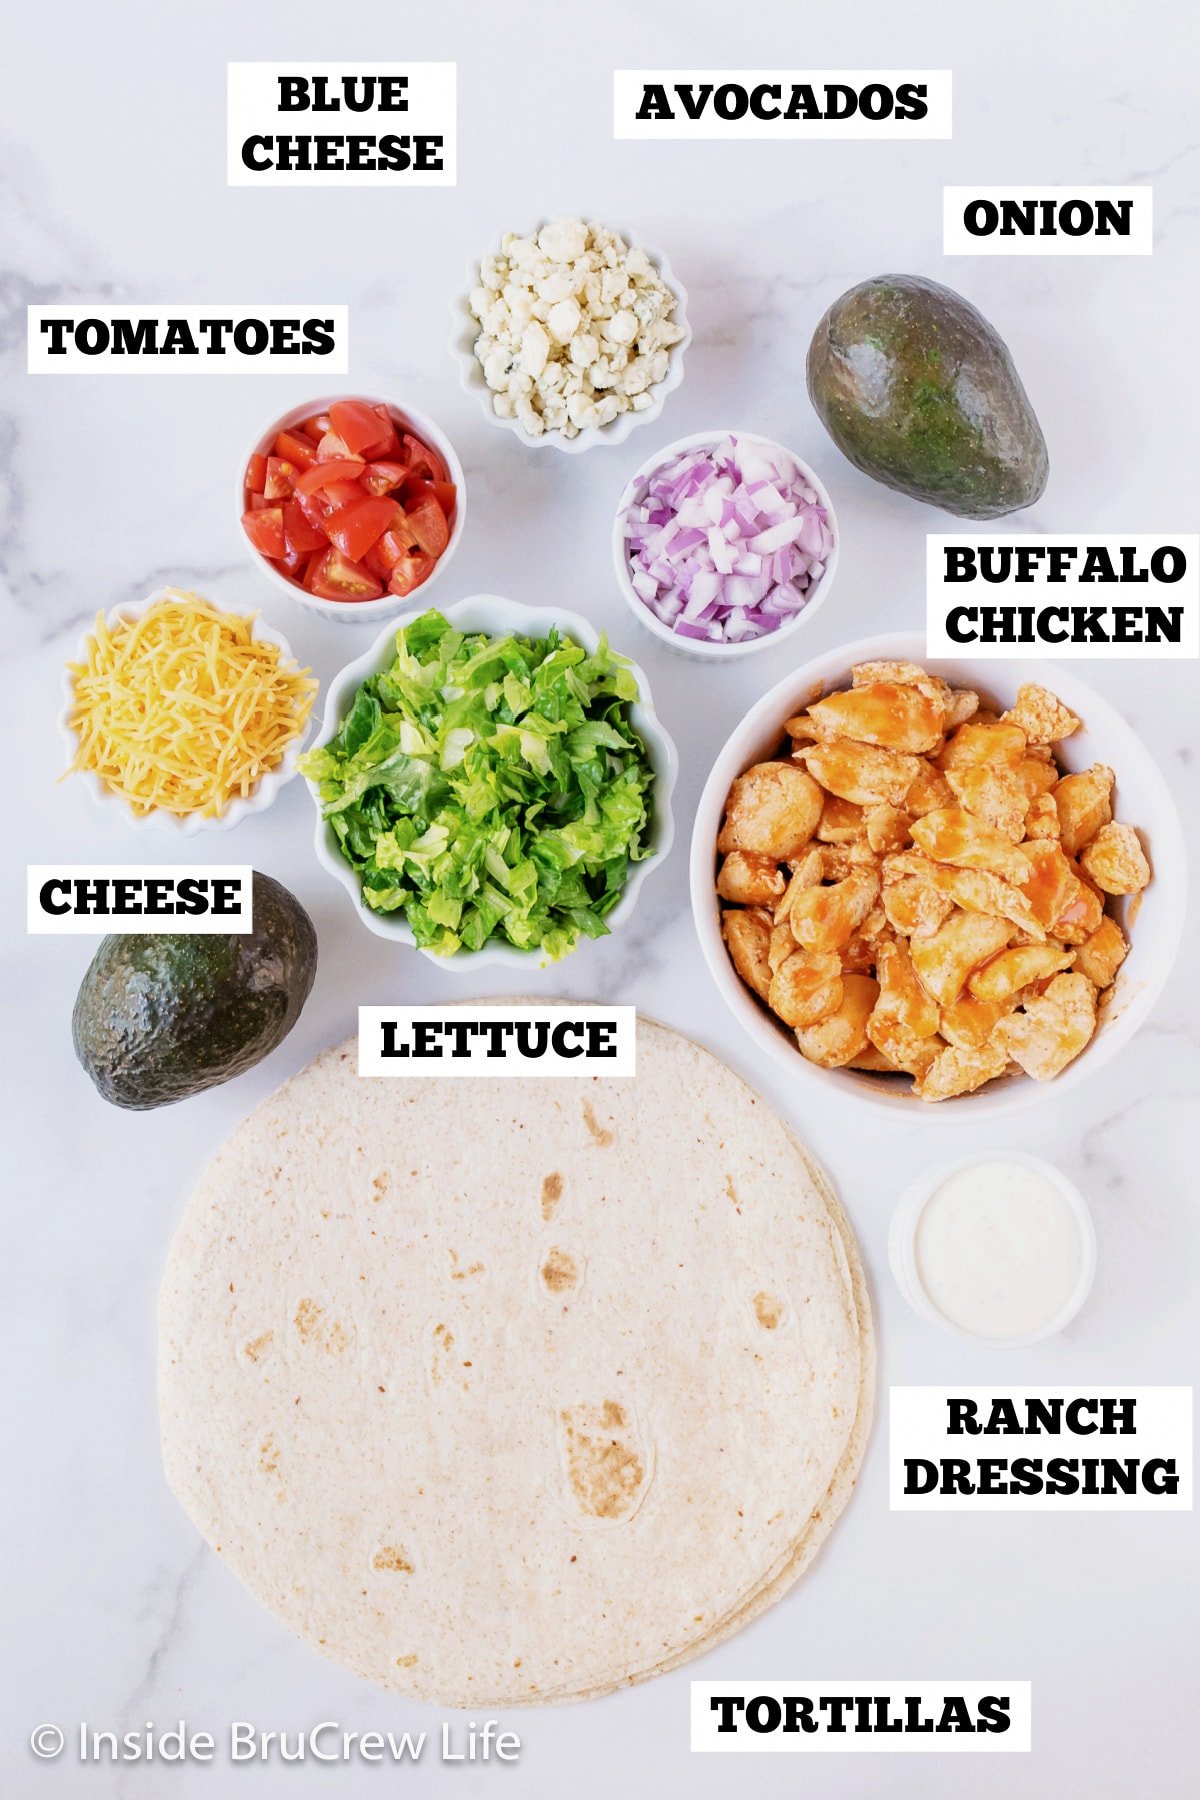 Chicken wrap Recipe and Nutrition - Eat This Much